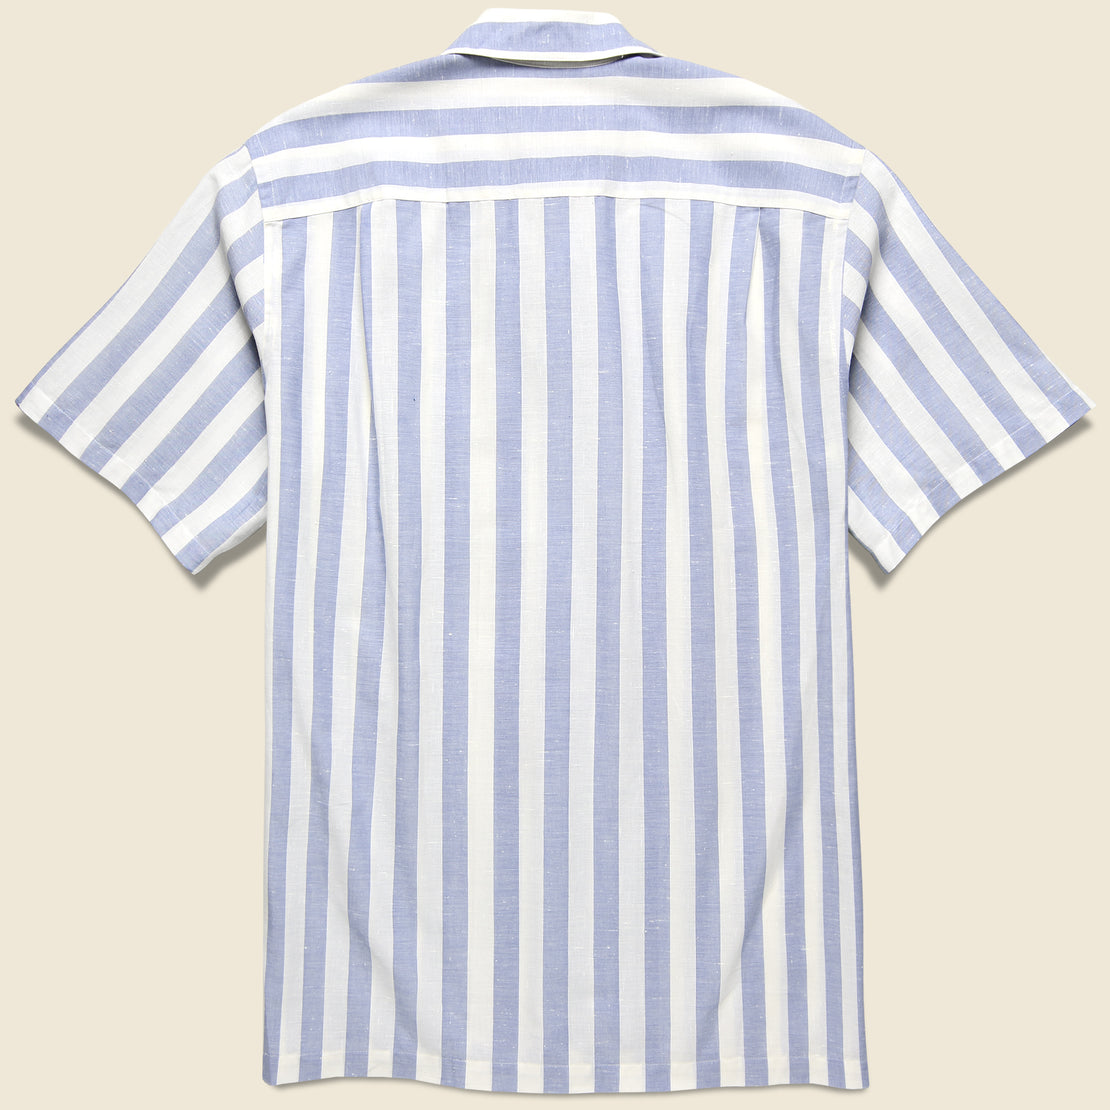 Bayon Donegal Stripe Shirt - Light Blue/White - Portuguese Flannel - STAG Provisions - Tops - S/S Woven - Stripe